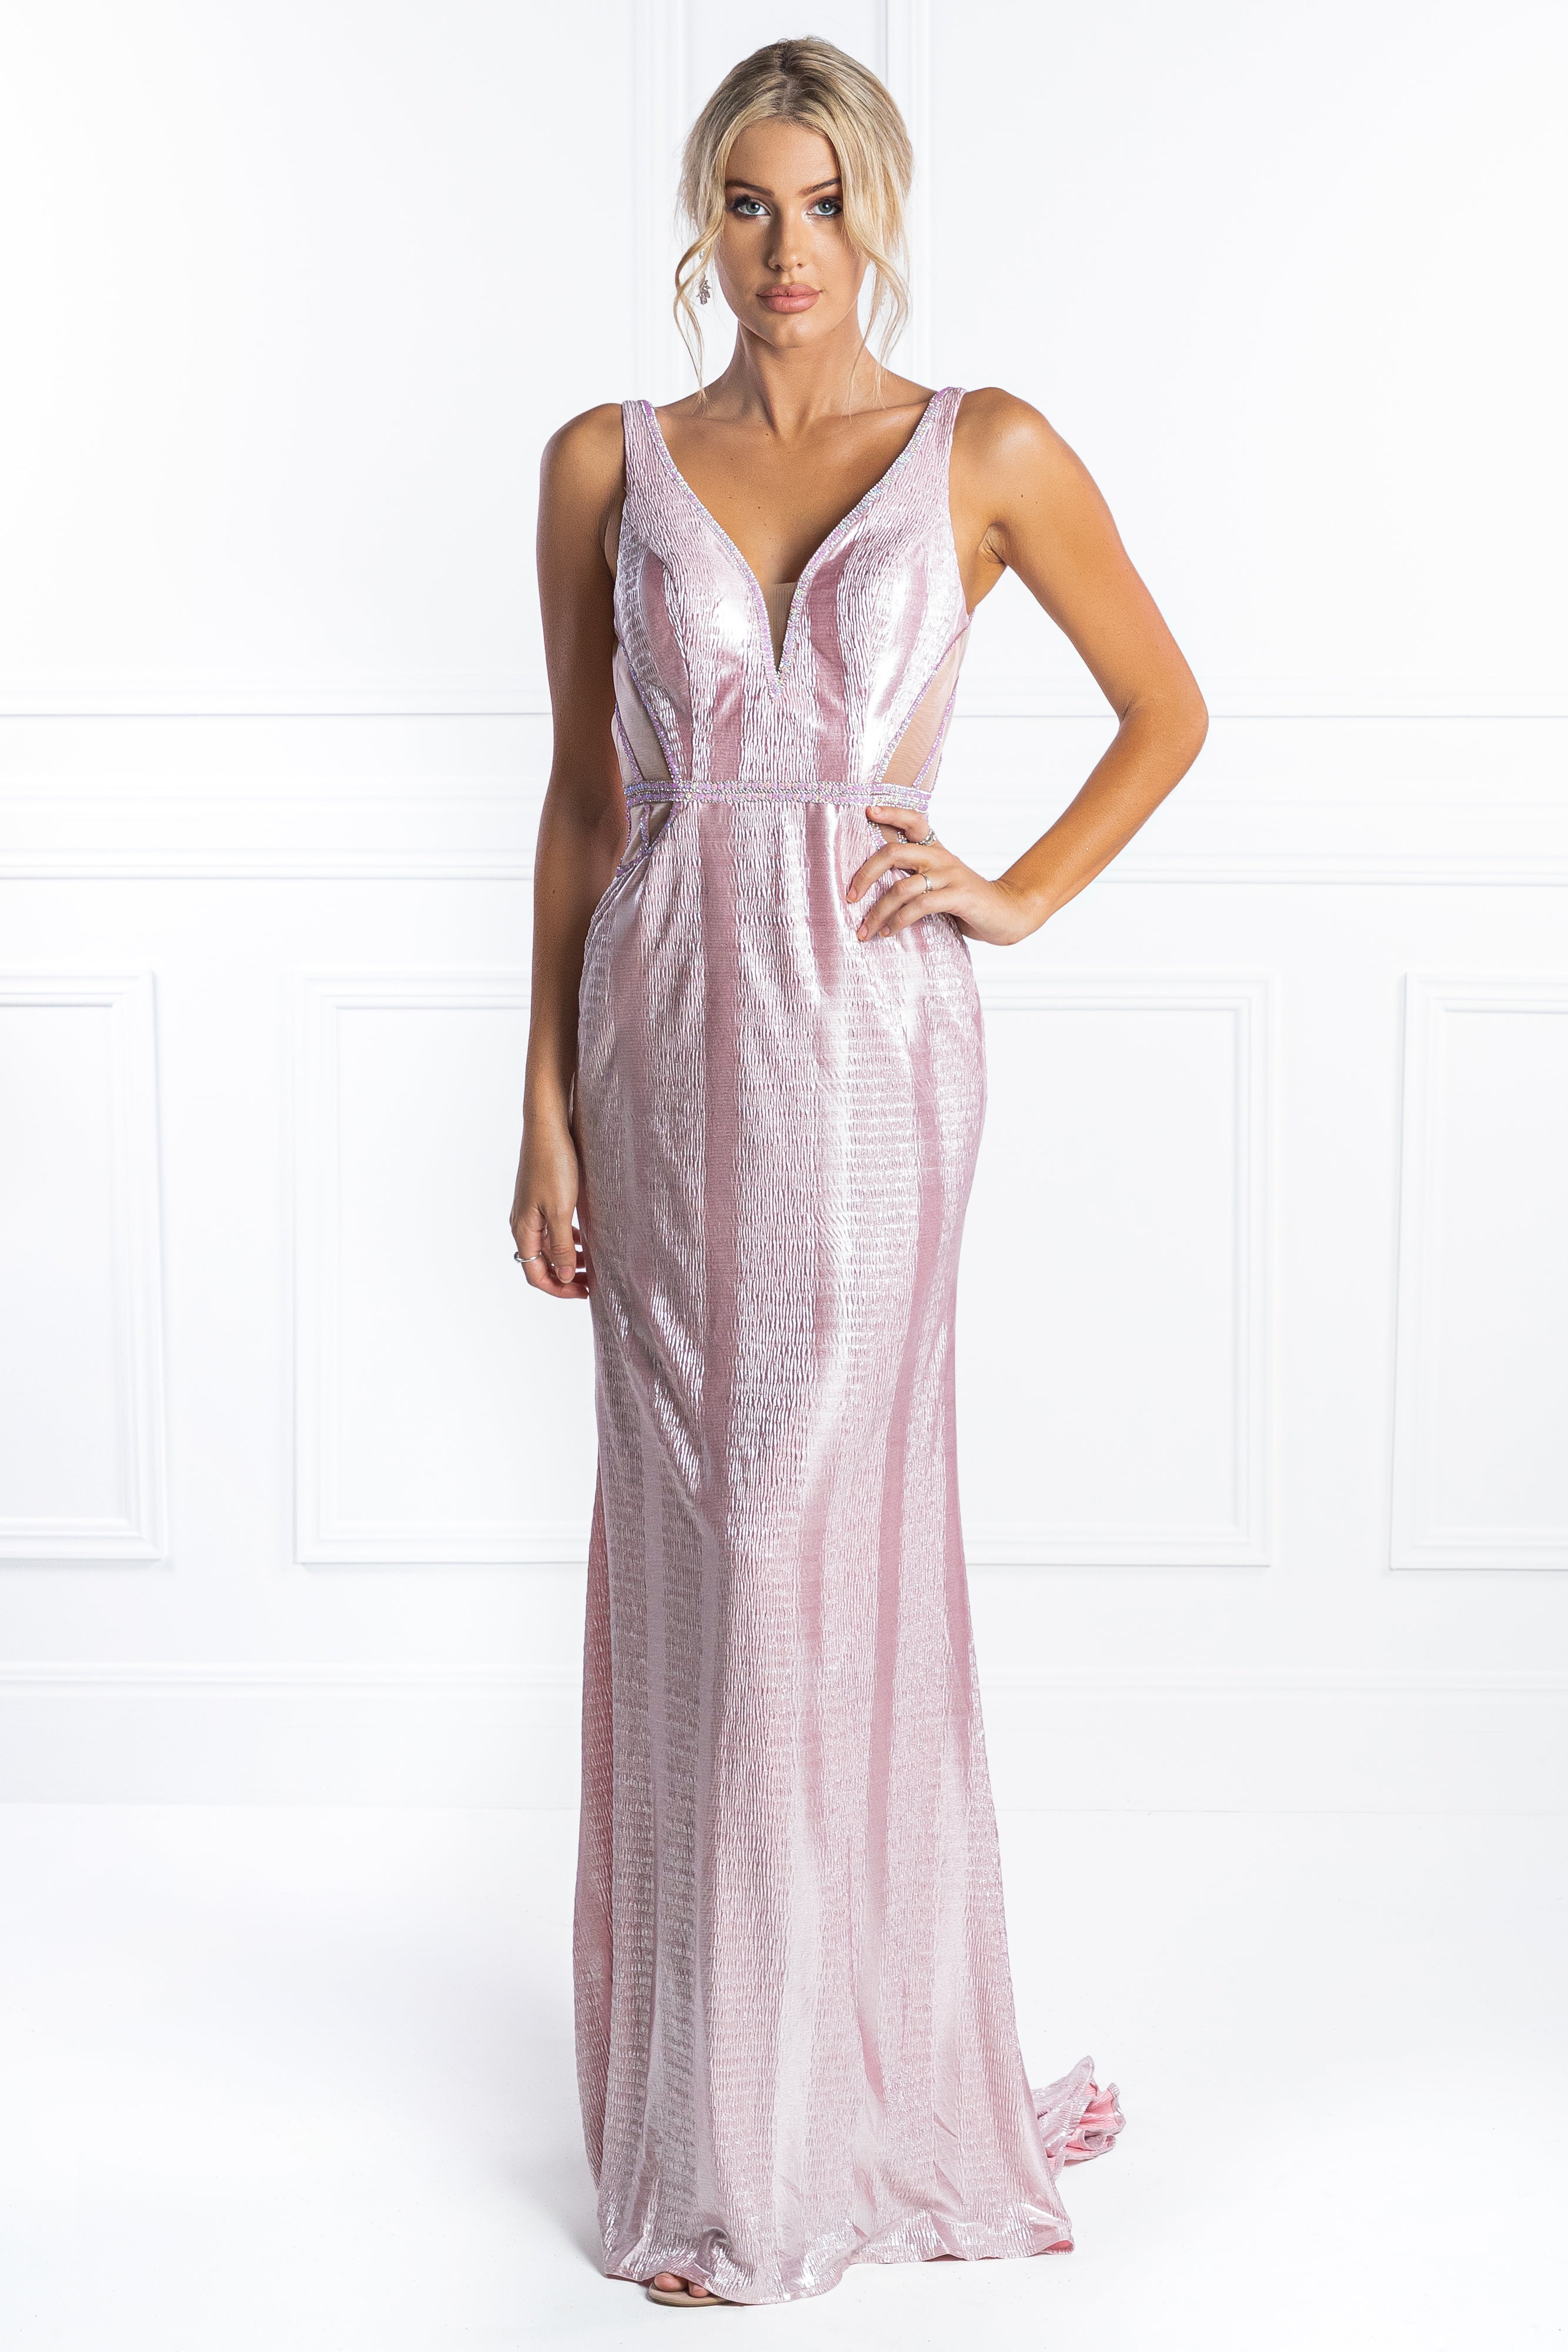 Honey Couture LONDON Pink Cut Out Formal Dress Honey Couture Custom$ AfterPay Humm ZipPay LayBuy Sezzle